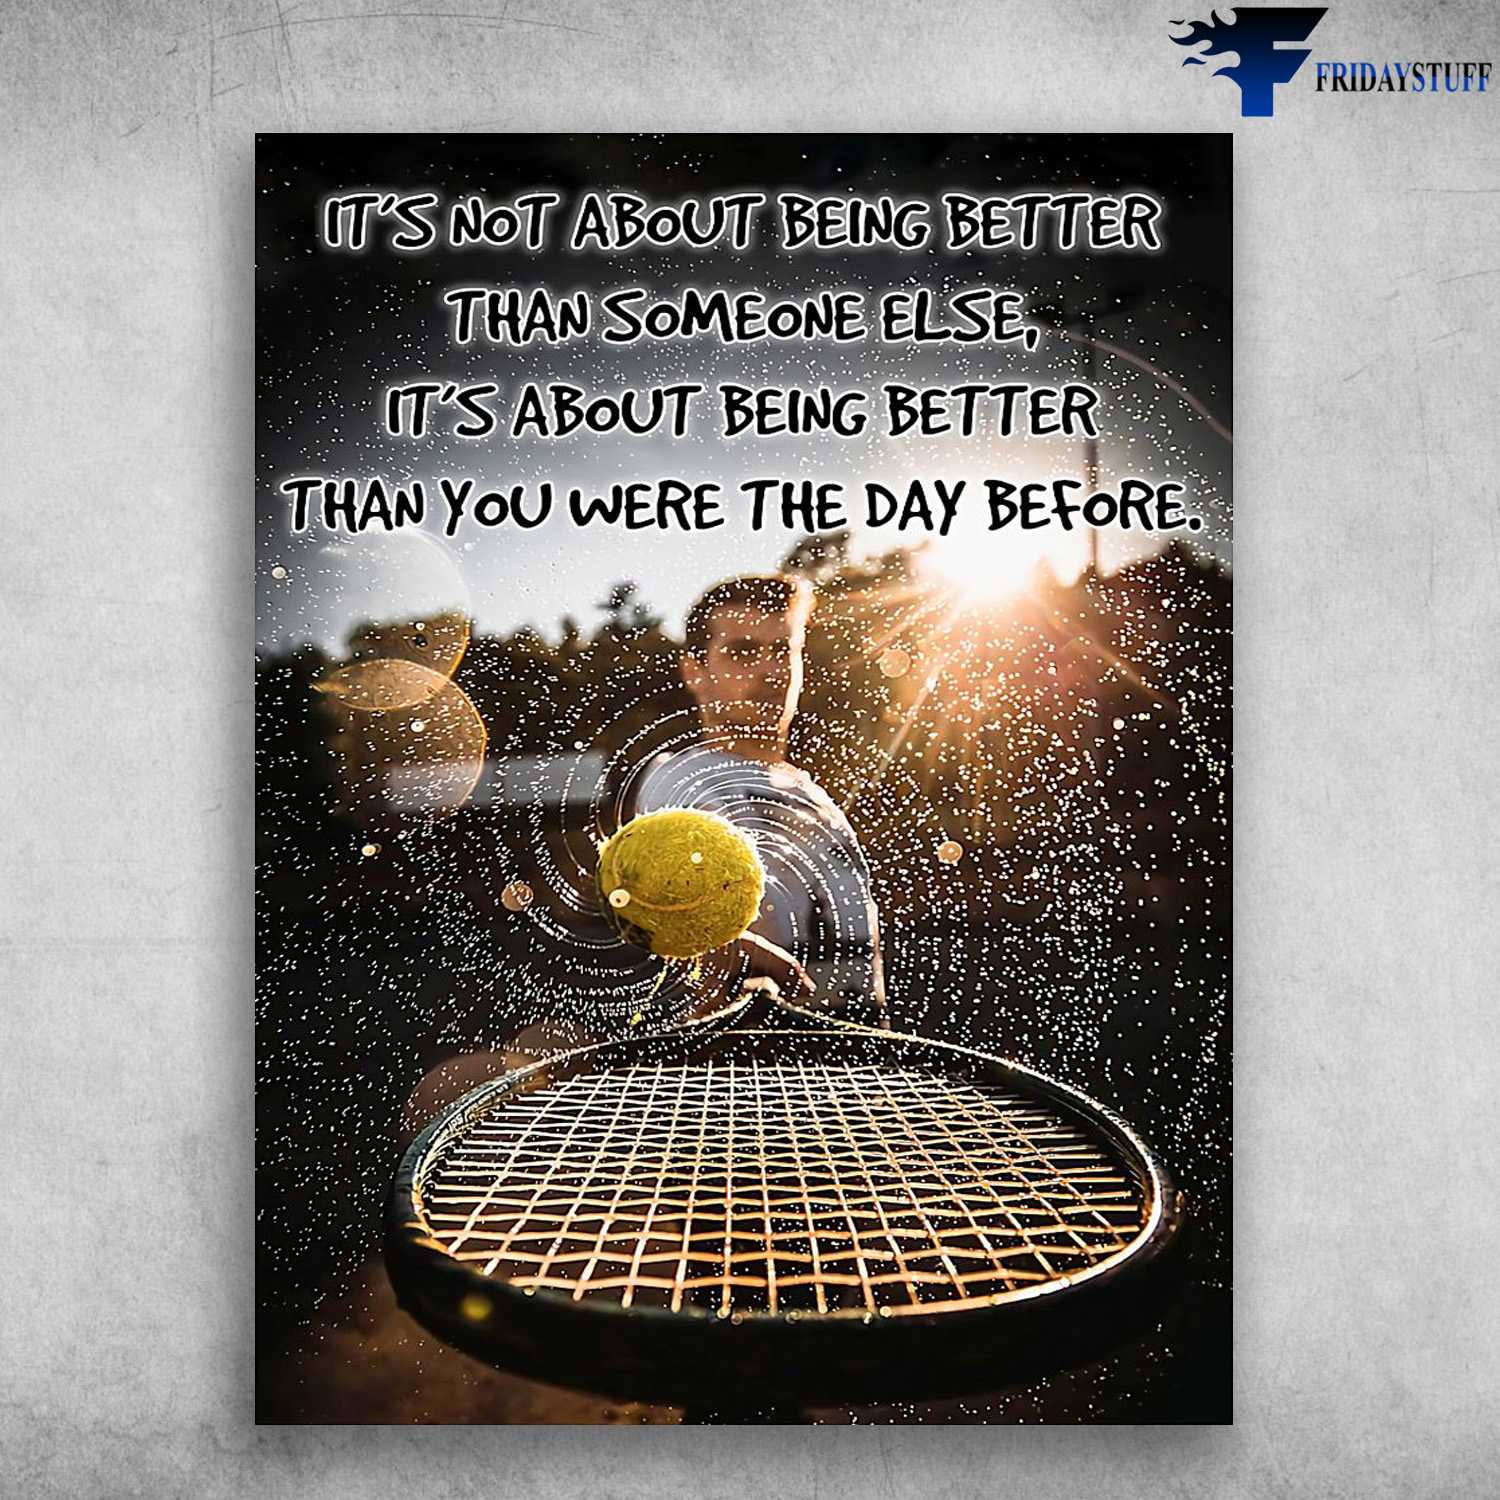 Tennis Player, Tennis Poster - It's Not About Being Better Than Someone Else, It's About Being Better Than You Were The Day Before